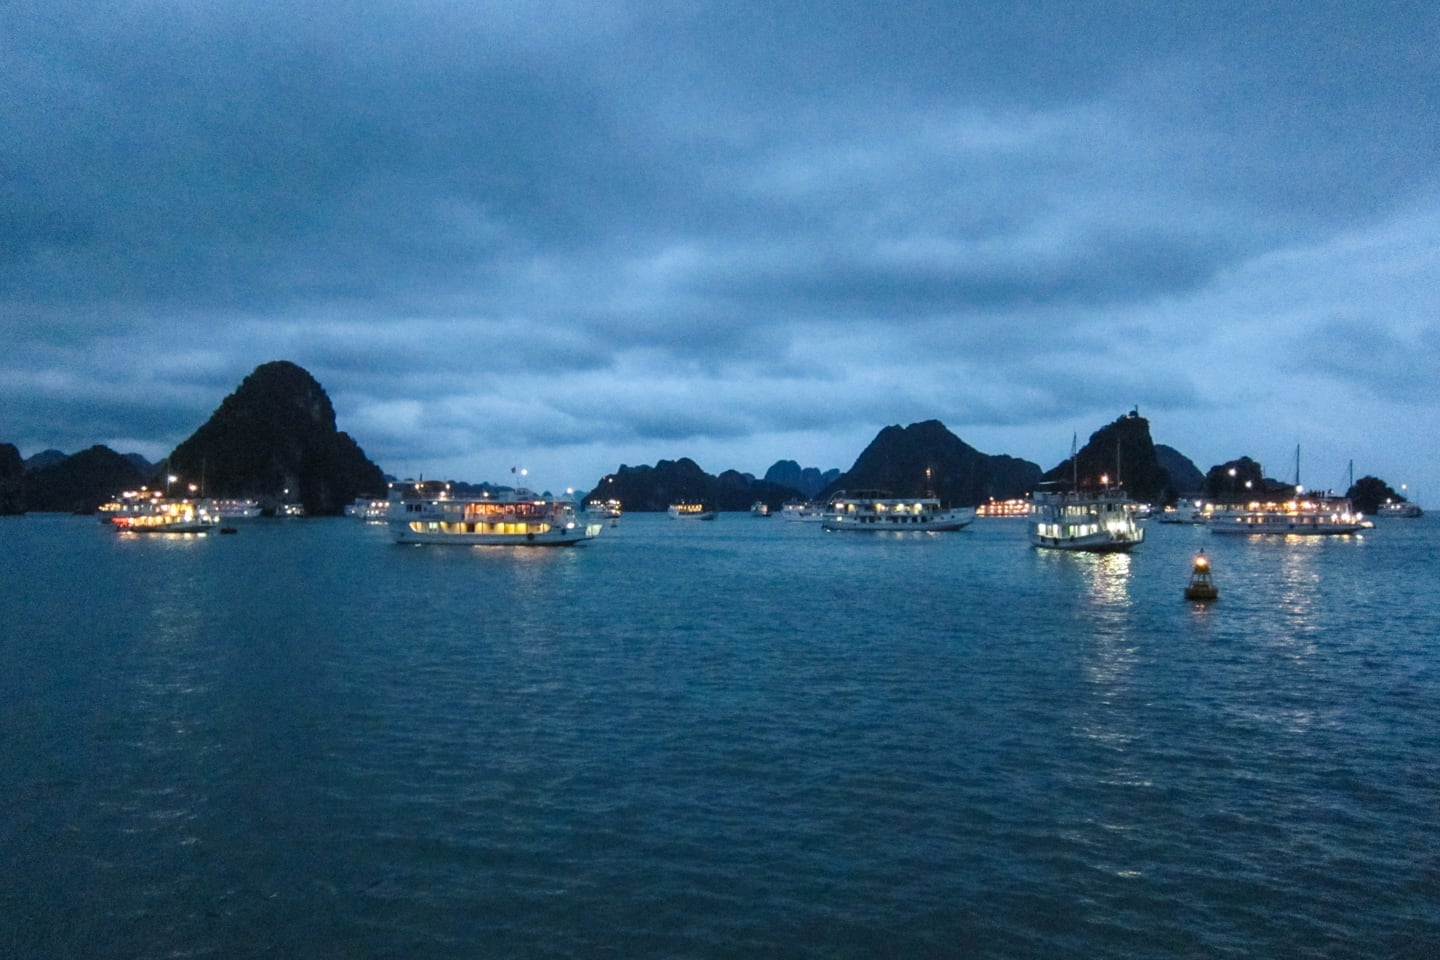 night time in Halong Bay